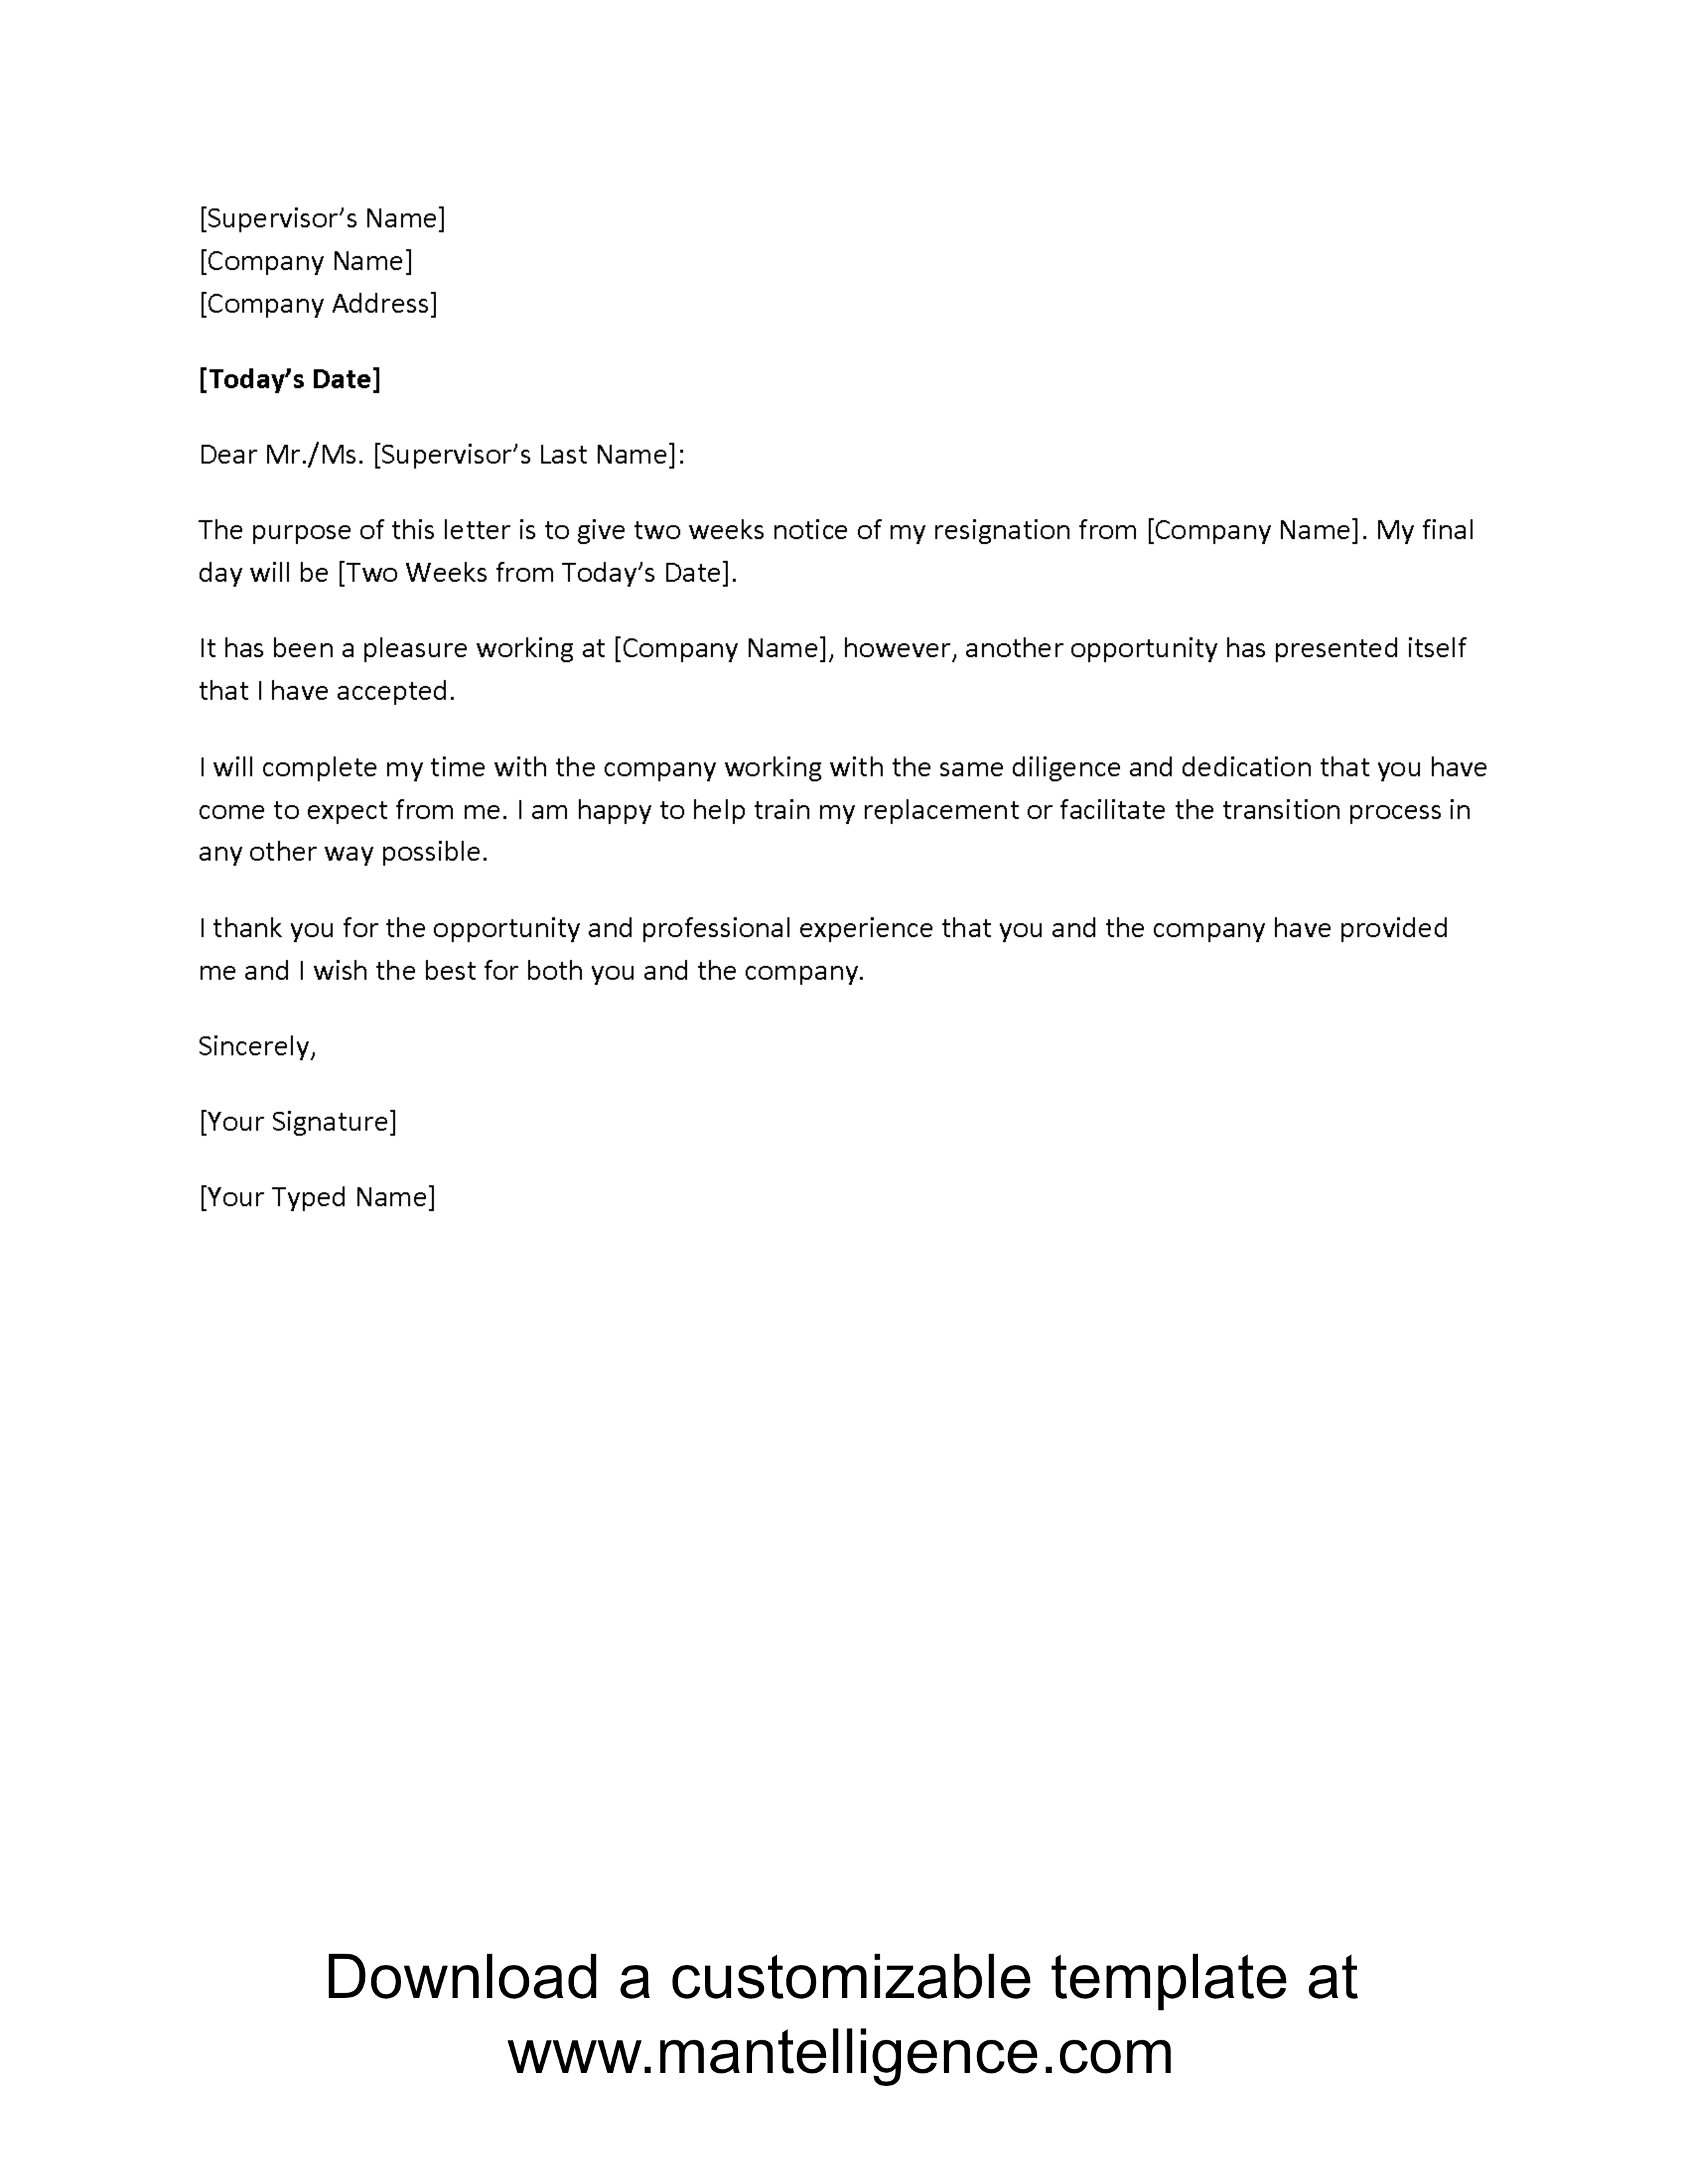 3 Highly Professional Two Weeks Notice Letter Templates-Template For 2 Weeks